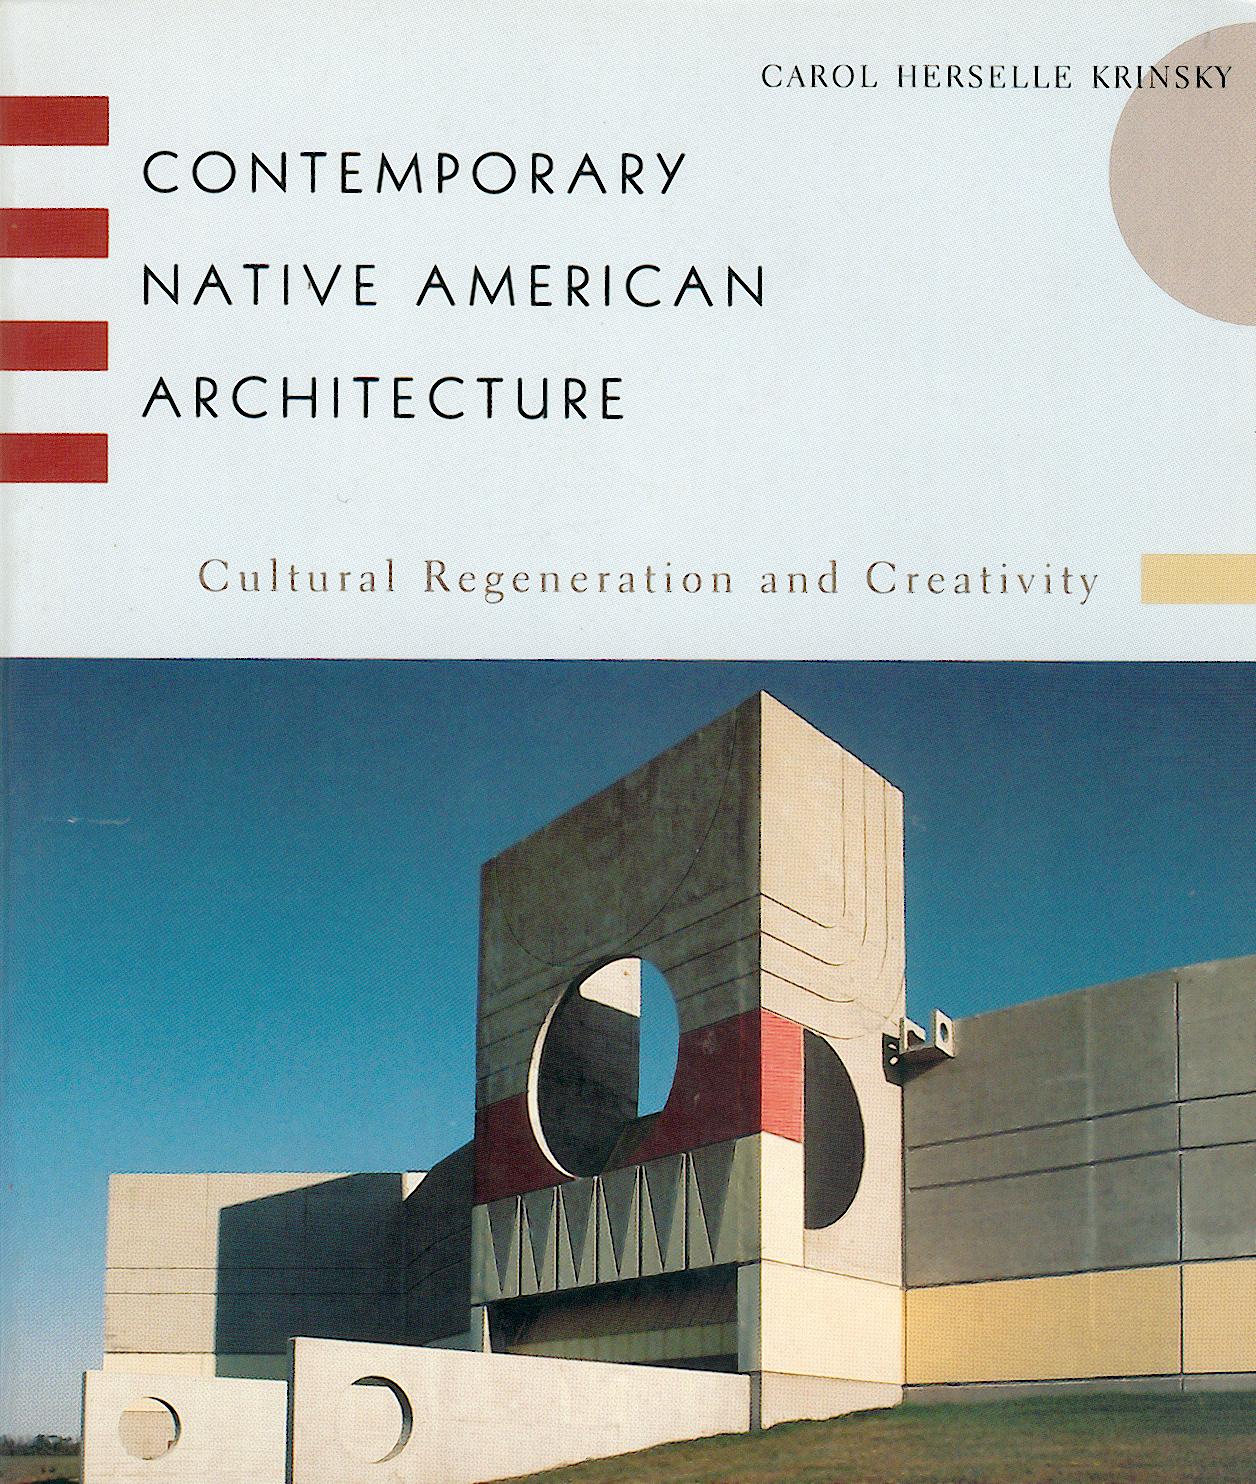 Krinsky, Carol Herselle  Contemporary Native American Architecture. Cultural Regeneration and Creativity. 